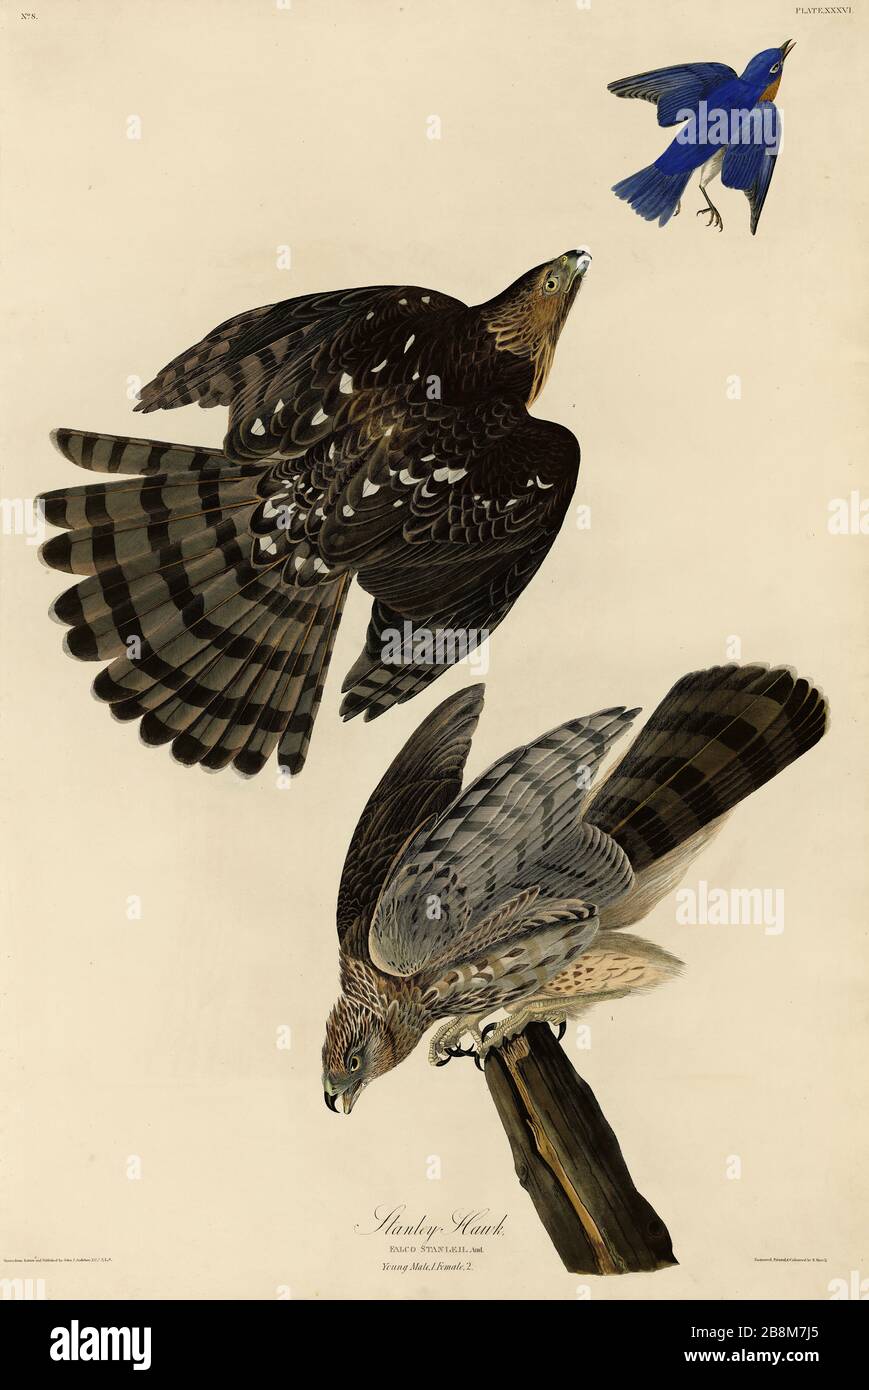 Plate 36 Stanley Hawk (Cooper's Hawk) from The Birds of America folio (1827–1839) by John James Audubon, Very high resolution and quality edited image Stock Photo